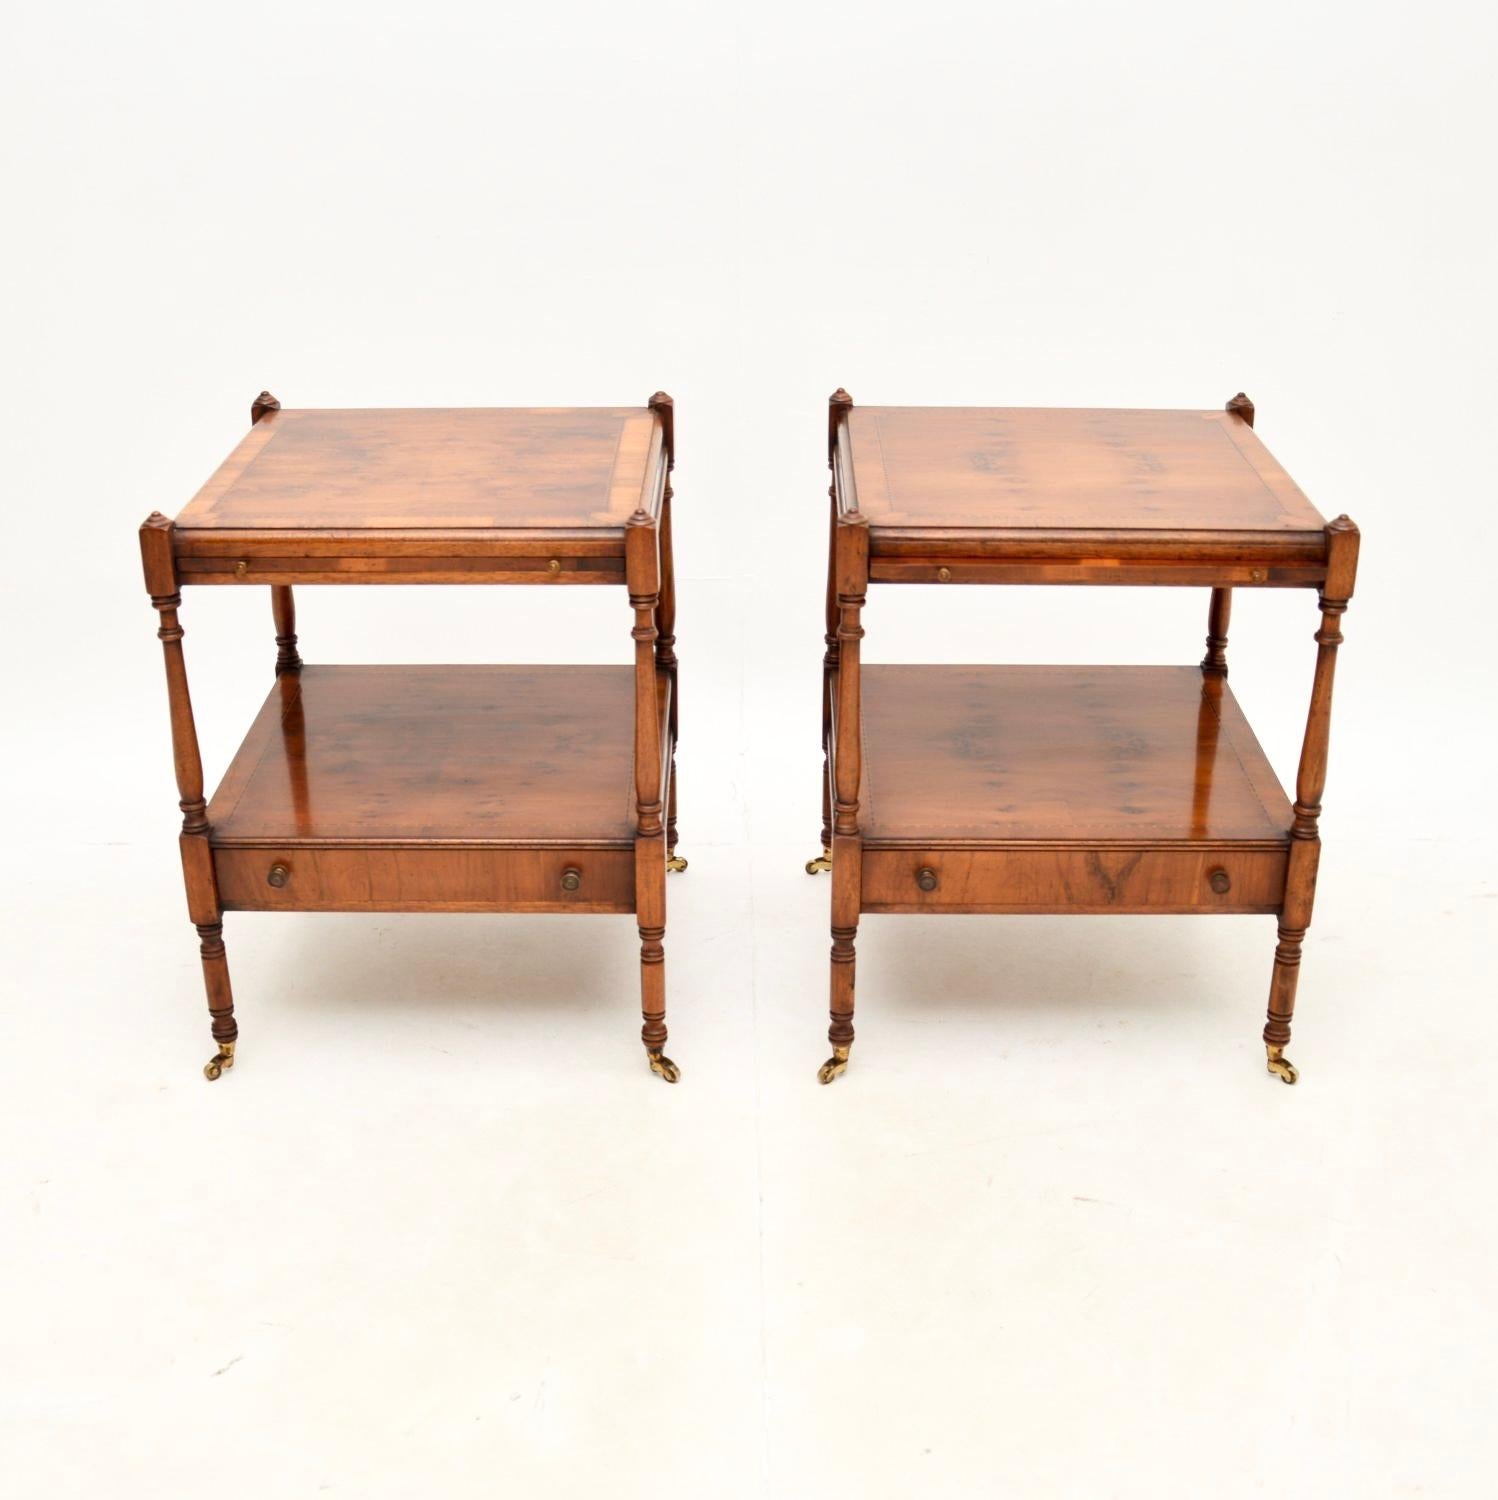 A fantastic pair of antique Georgian style yew wood side tables. They were made in England, and date from around the 1950’s.

The quality is great, they are very well made with beautiful inlays around the borders, nicely turned finials and legs. The